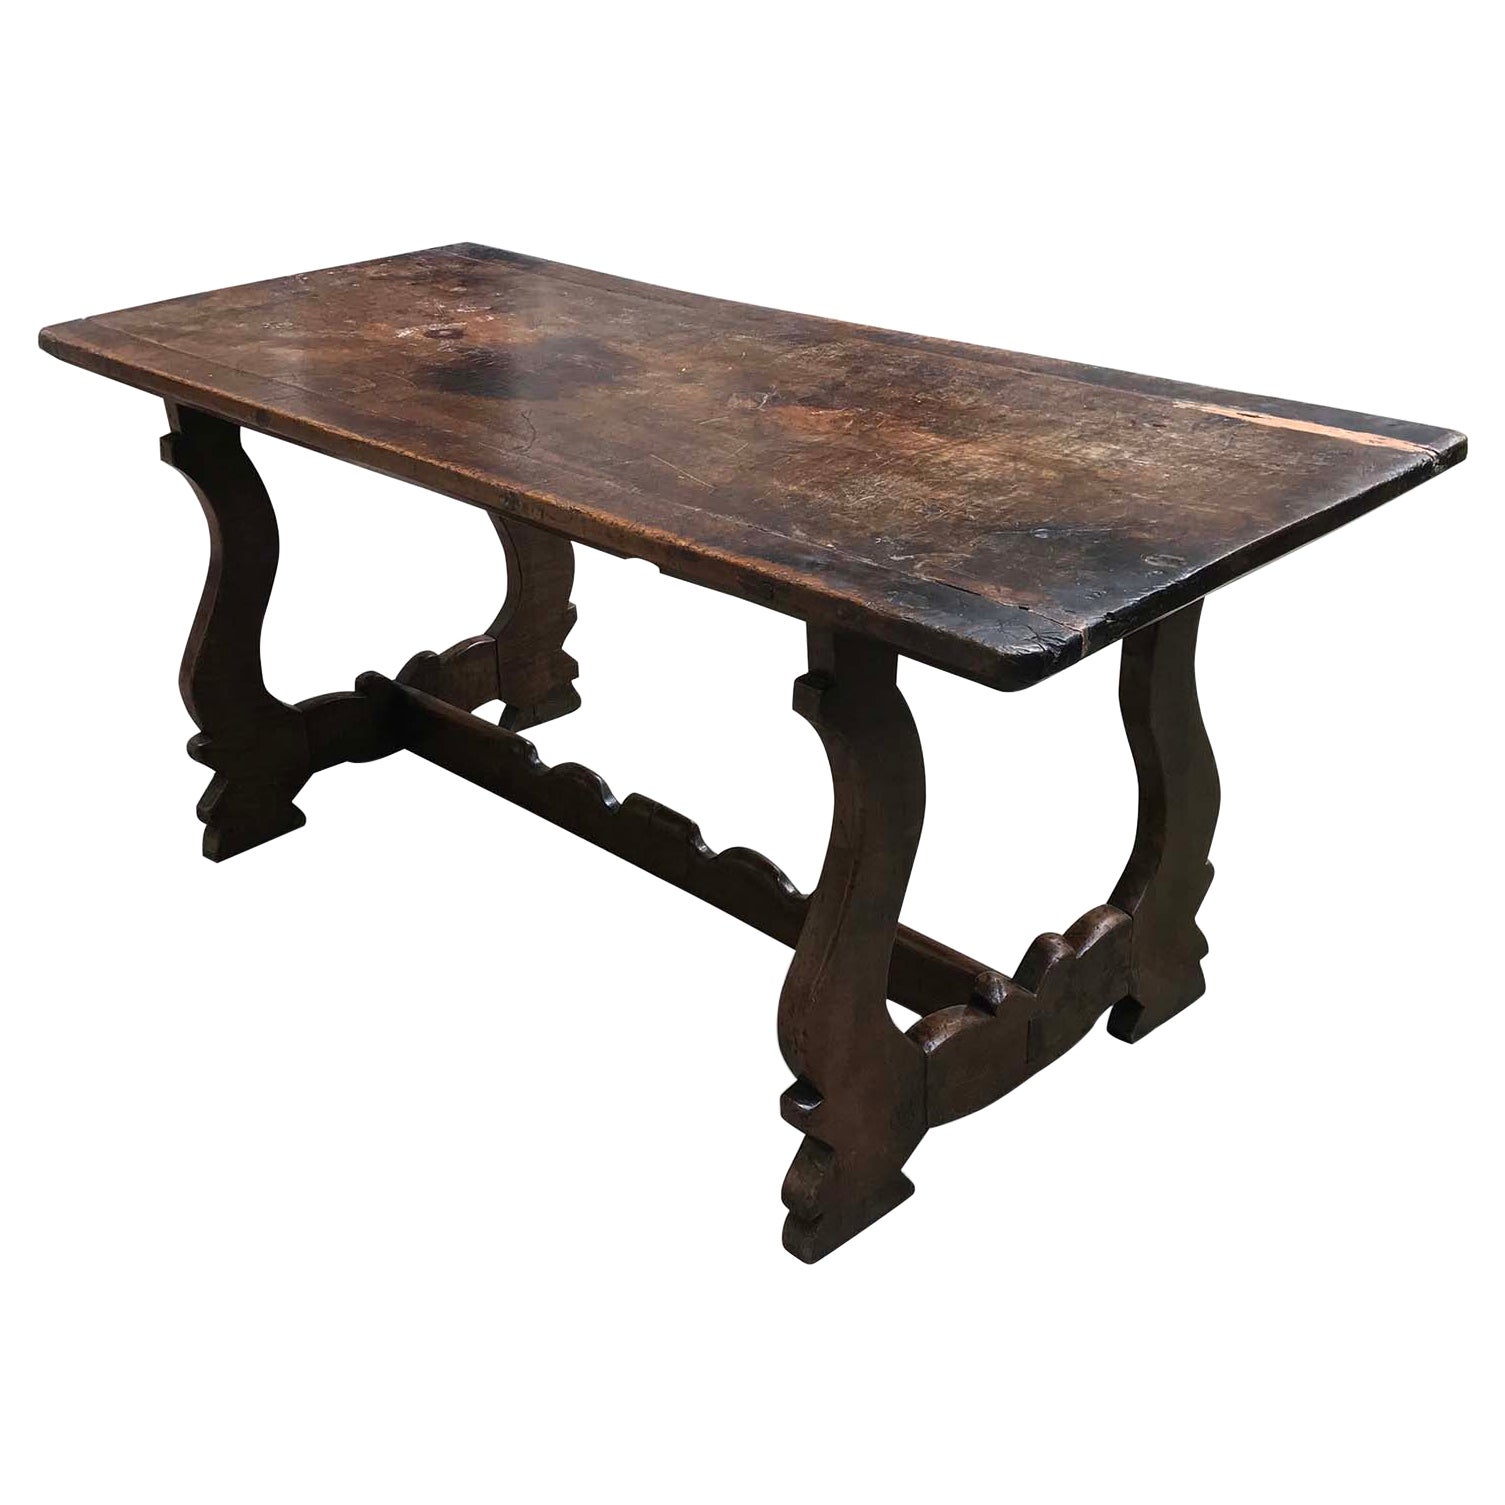 18th Century Italian Fratino Table with Lyre Legs Solid Walnut Rectangular Table